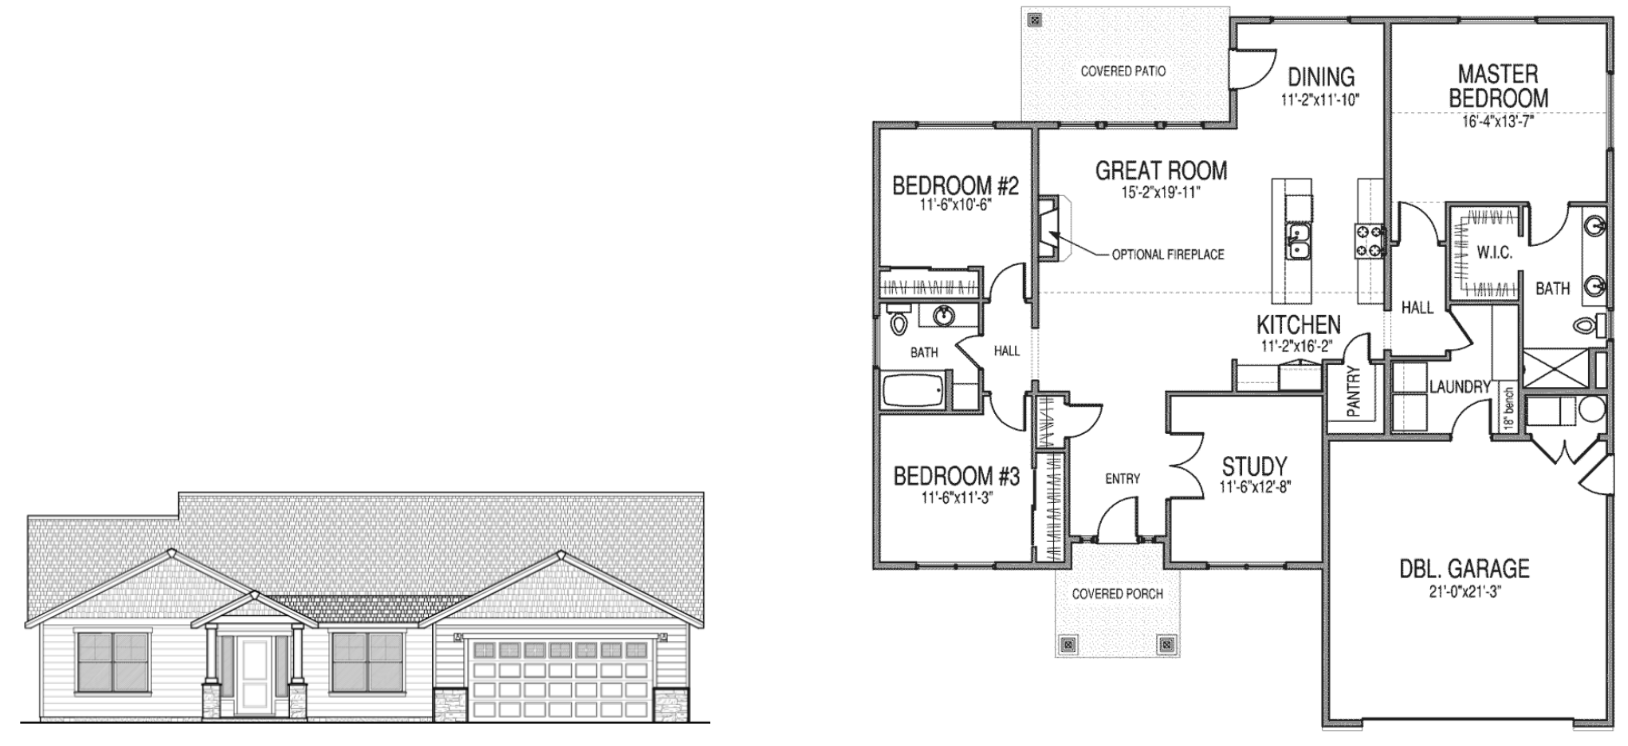 Lincoln 1 single story home floor plan with a master bedroom with a walk in closet and bathroom, 2 additional bedrooms, another bathroom, a great room, dining room, kitchen, pantry, laundry room, study, double garage, and a covered porch and patio